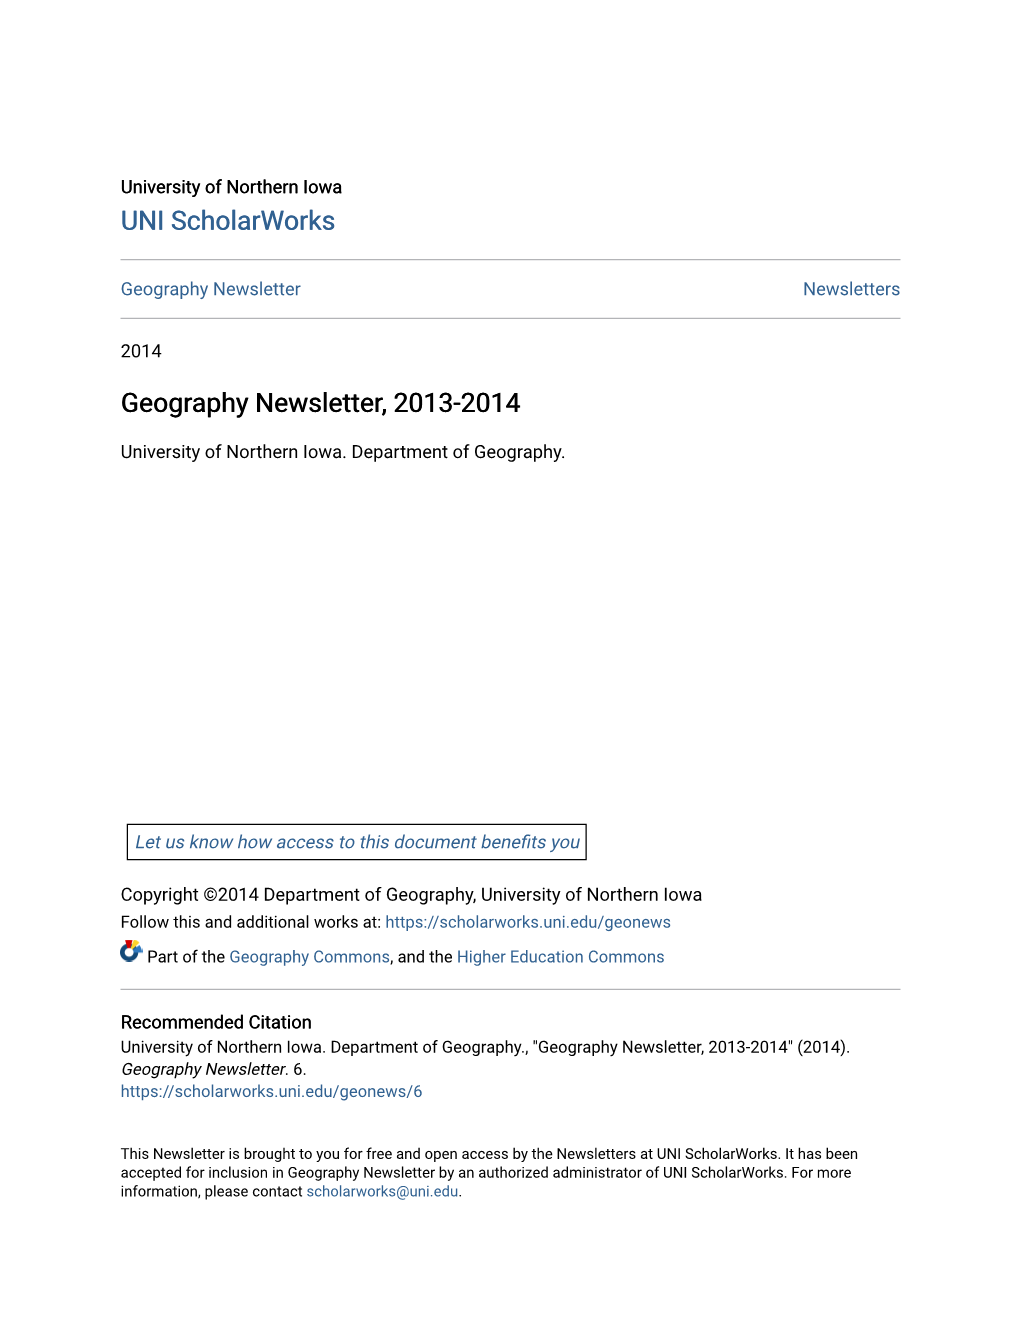 Geography Newsletter, 2013-2014